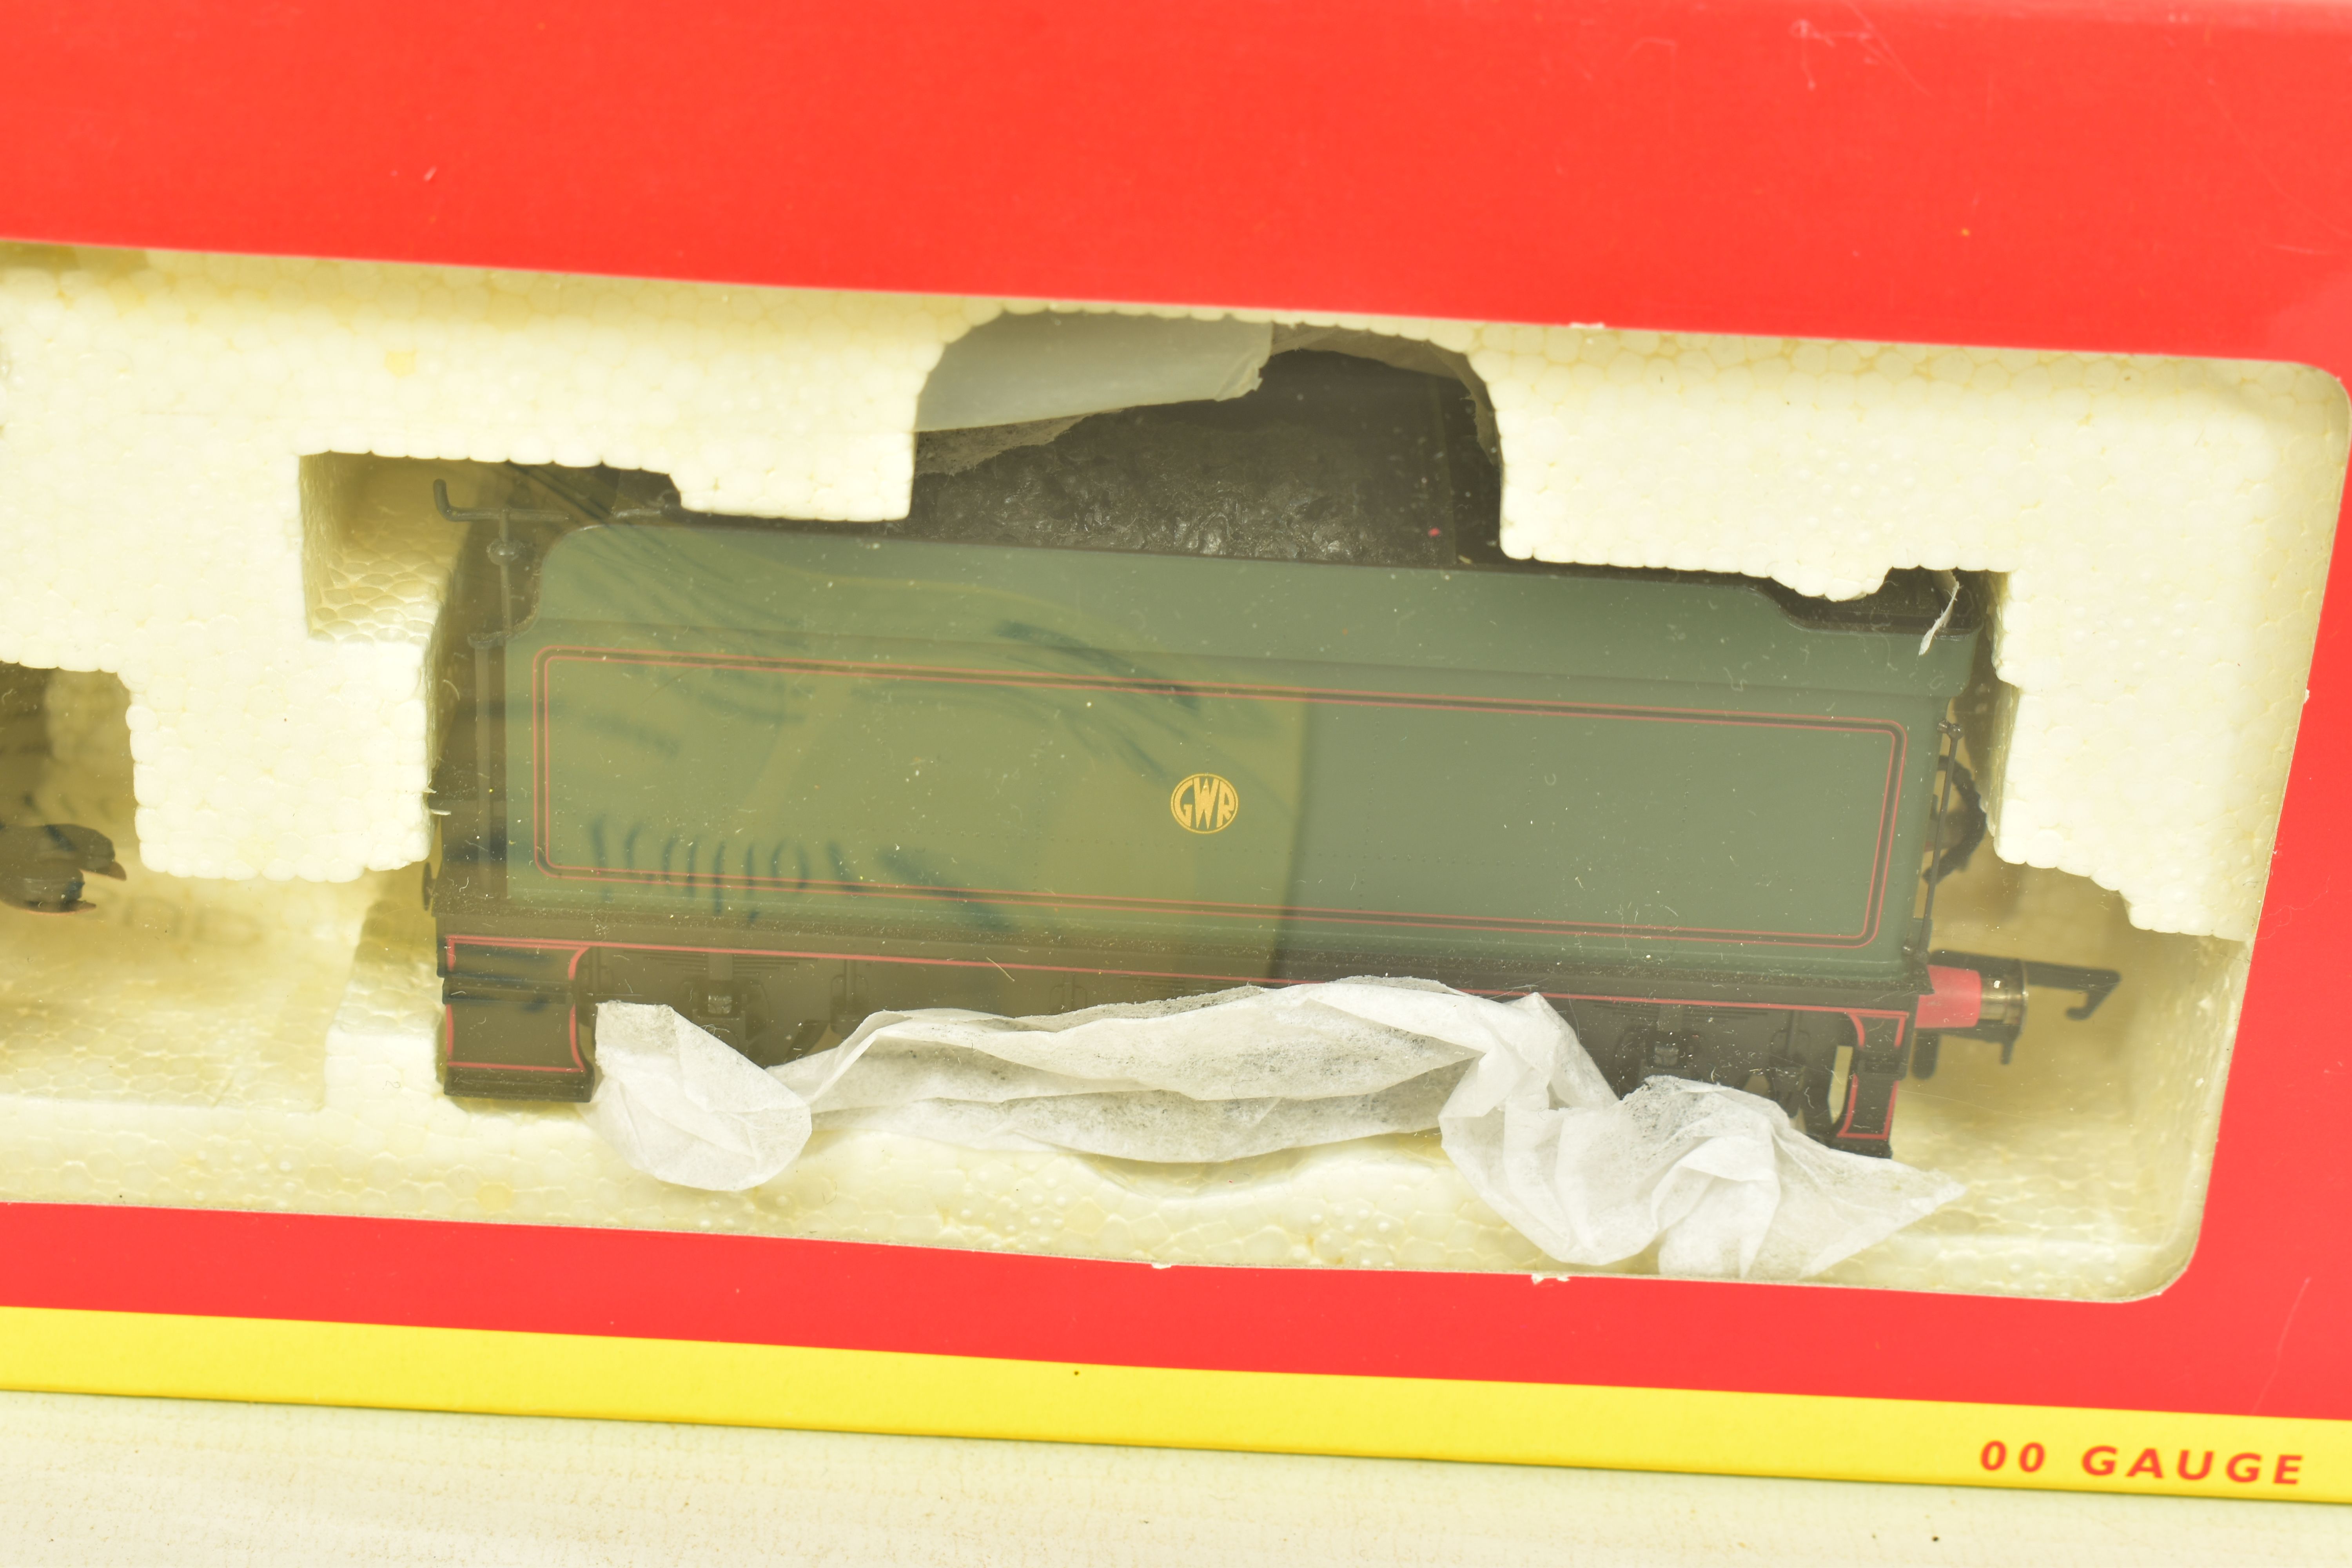 THREE BOXED HORNBY RAILWAYS OO GAUGE LOCOMOTIVES, limited edition West Country class 'Bude' No. - Image 10 of 12